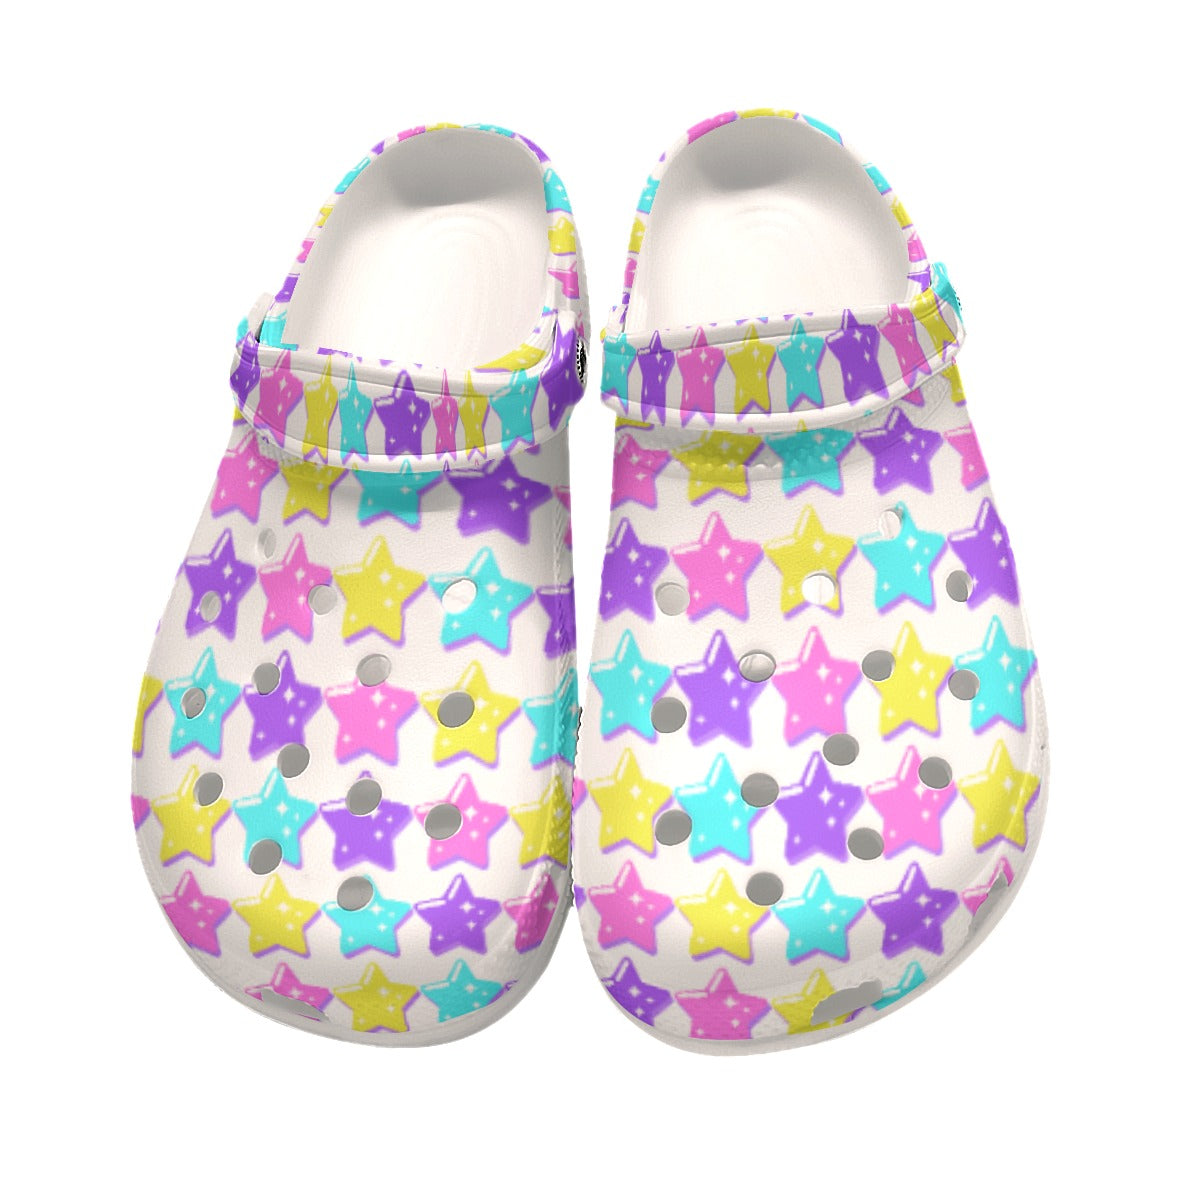 Electric Star Wave White Classic Clogs Women's Shoes